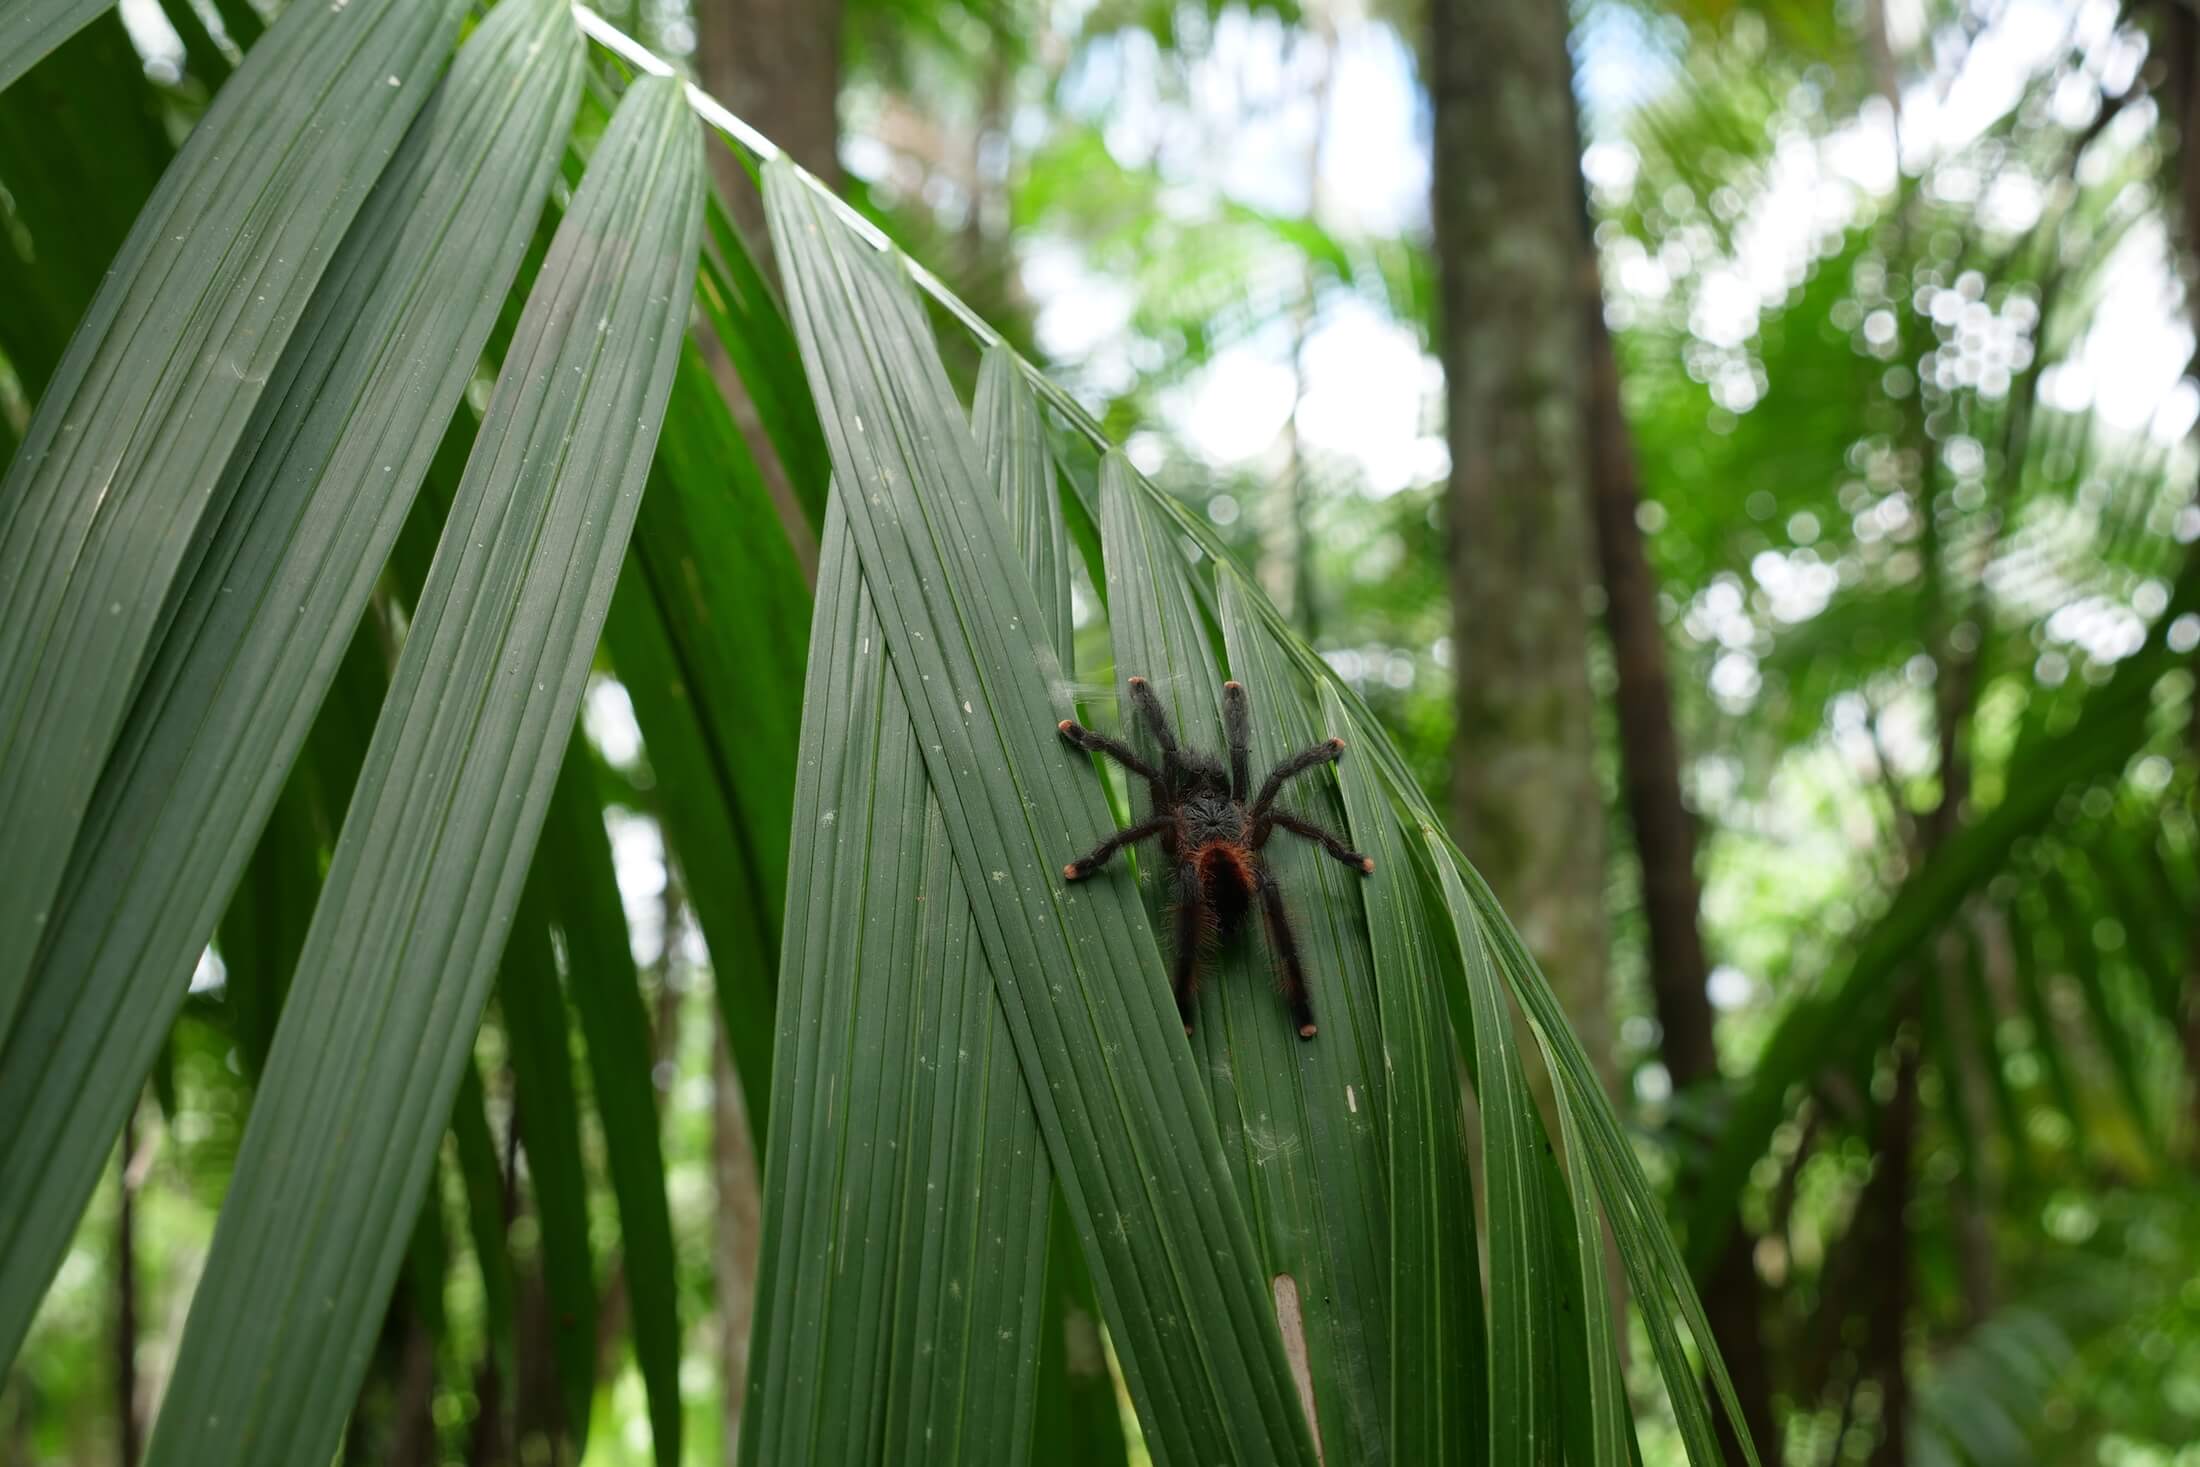 Spiders and other animals also live very well here in the Amazon wet environment